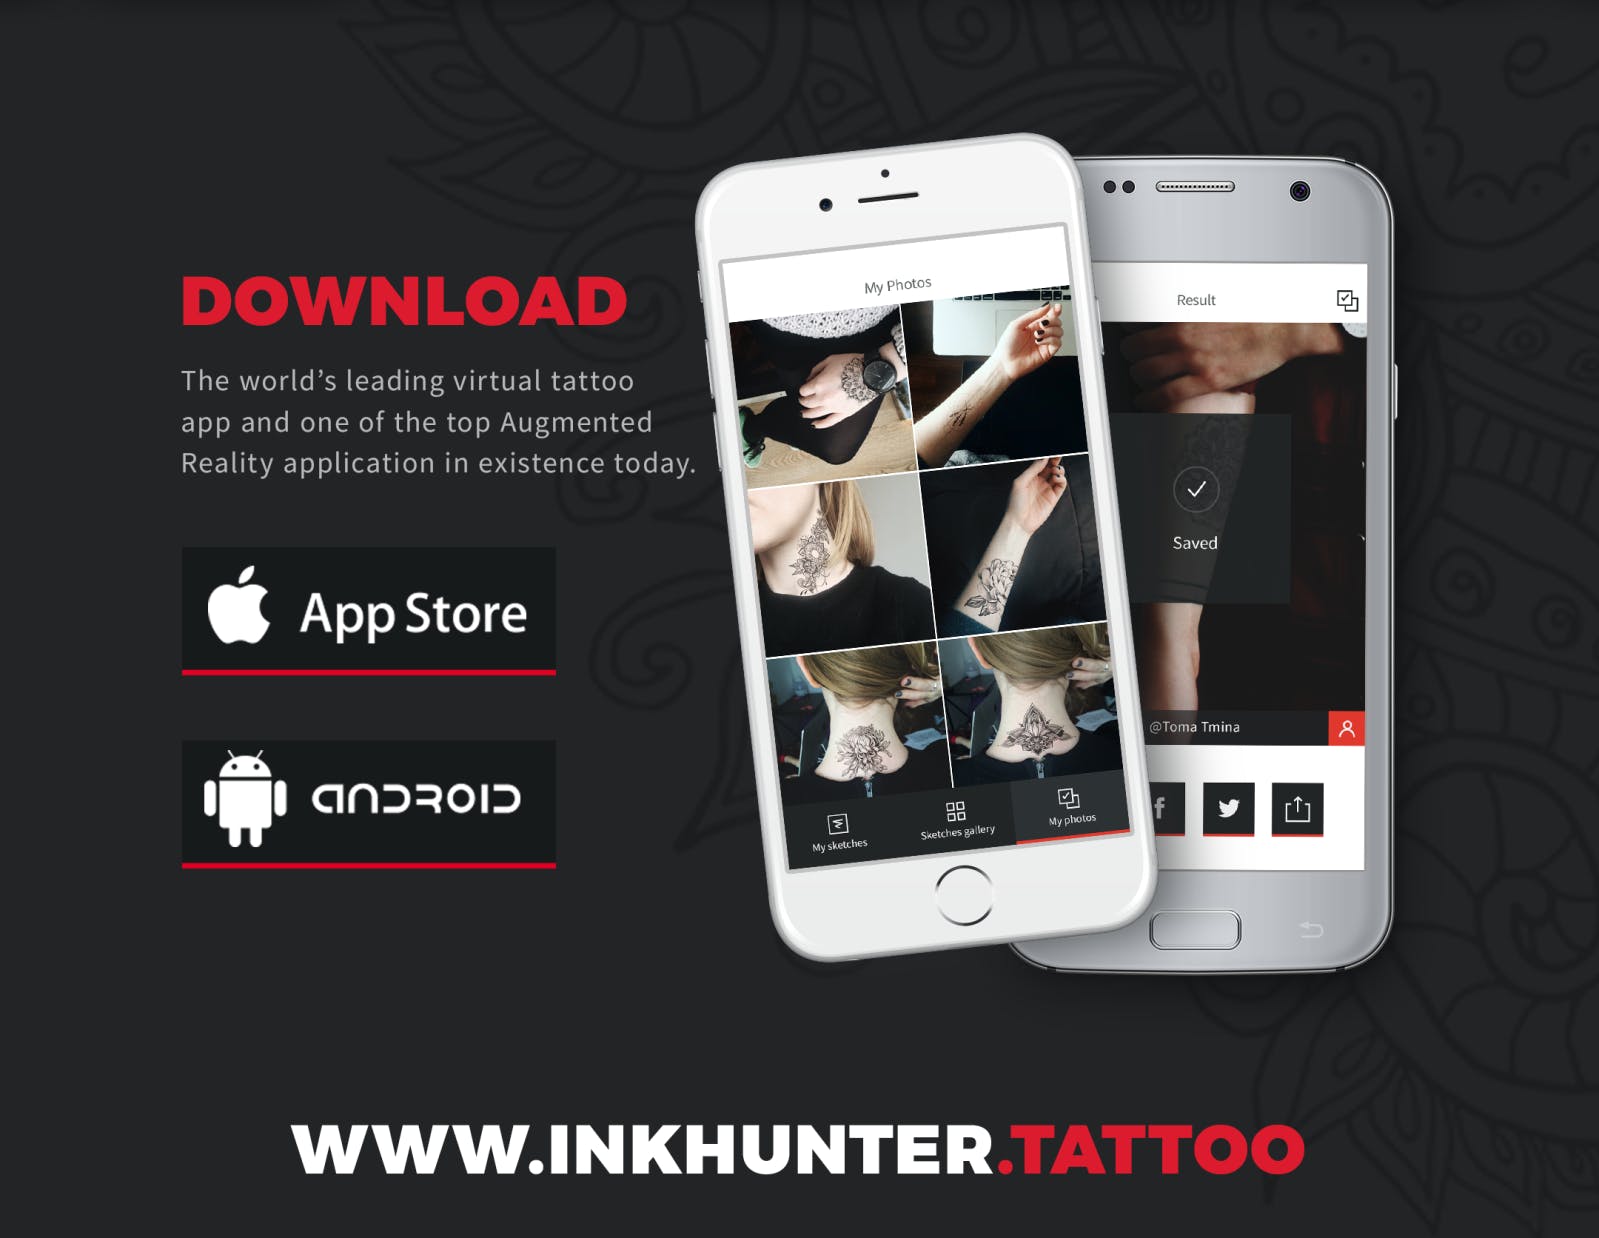 INKHUNTER for Android media 2